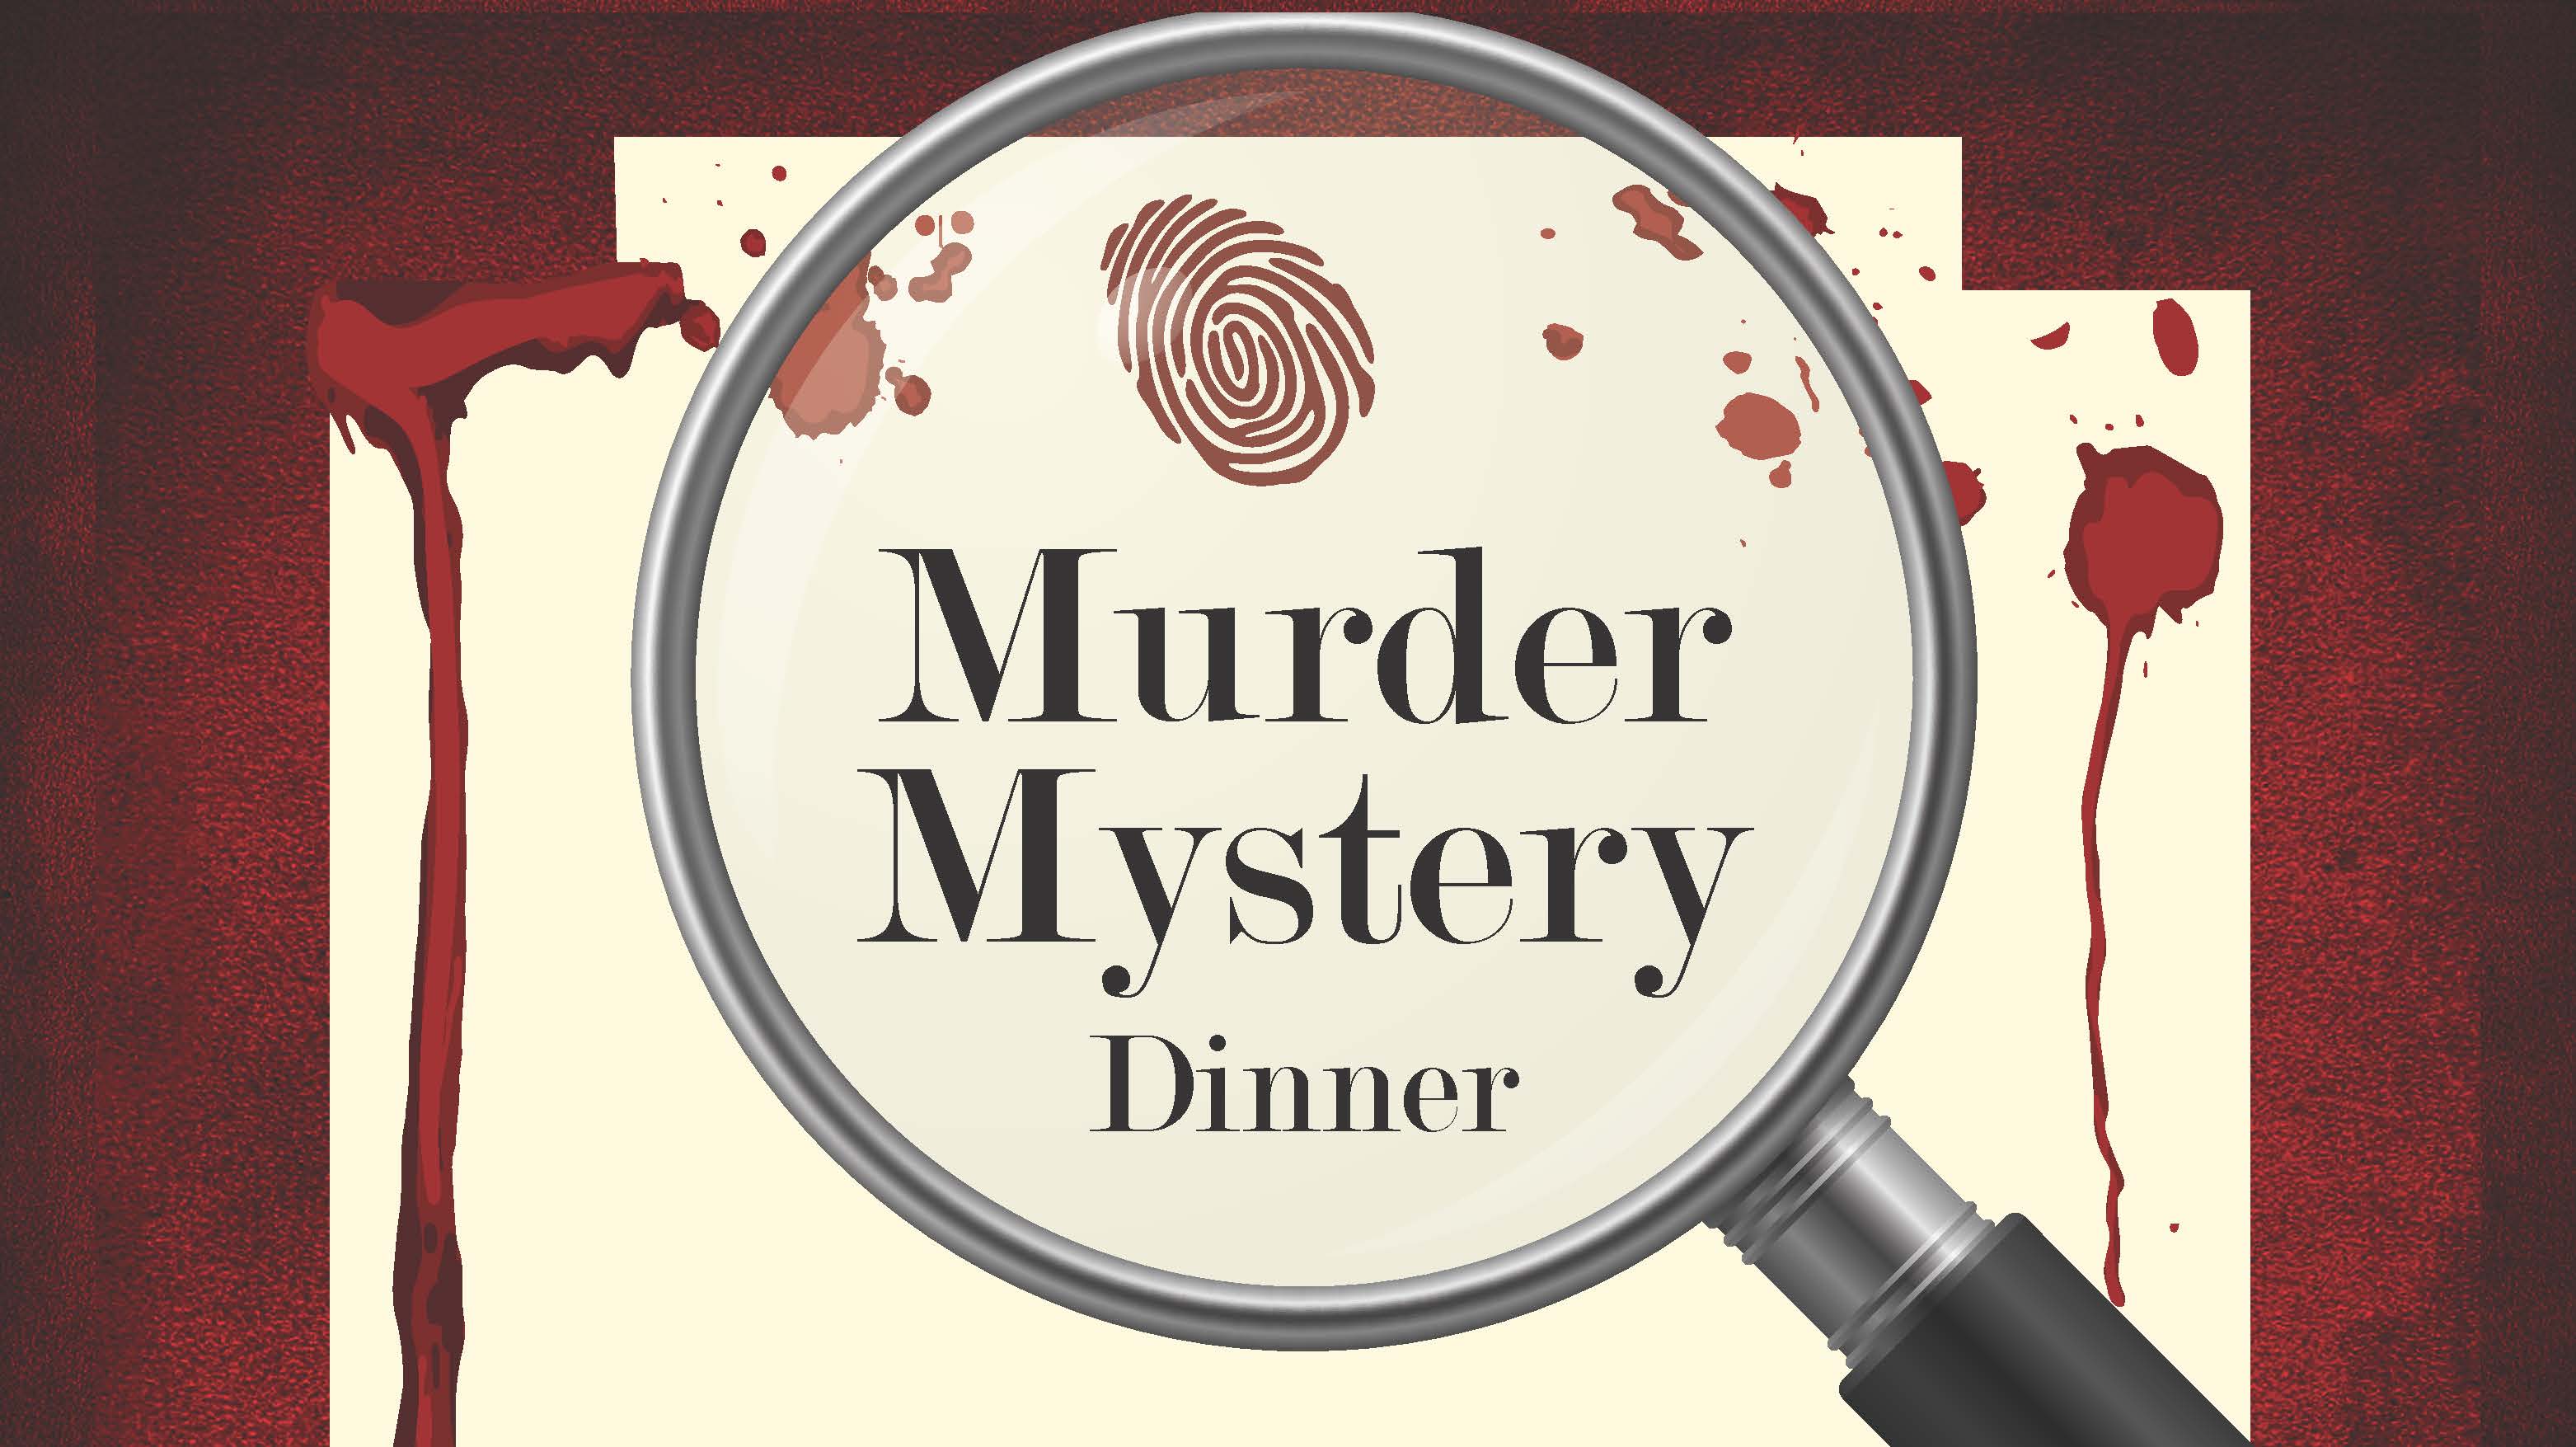 view-event-murder-mystery-dinner-ft-irwin-us-army-mwr